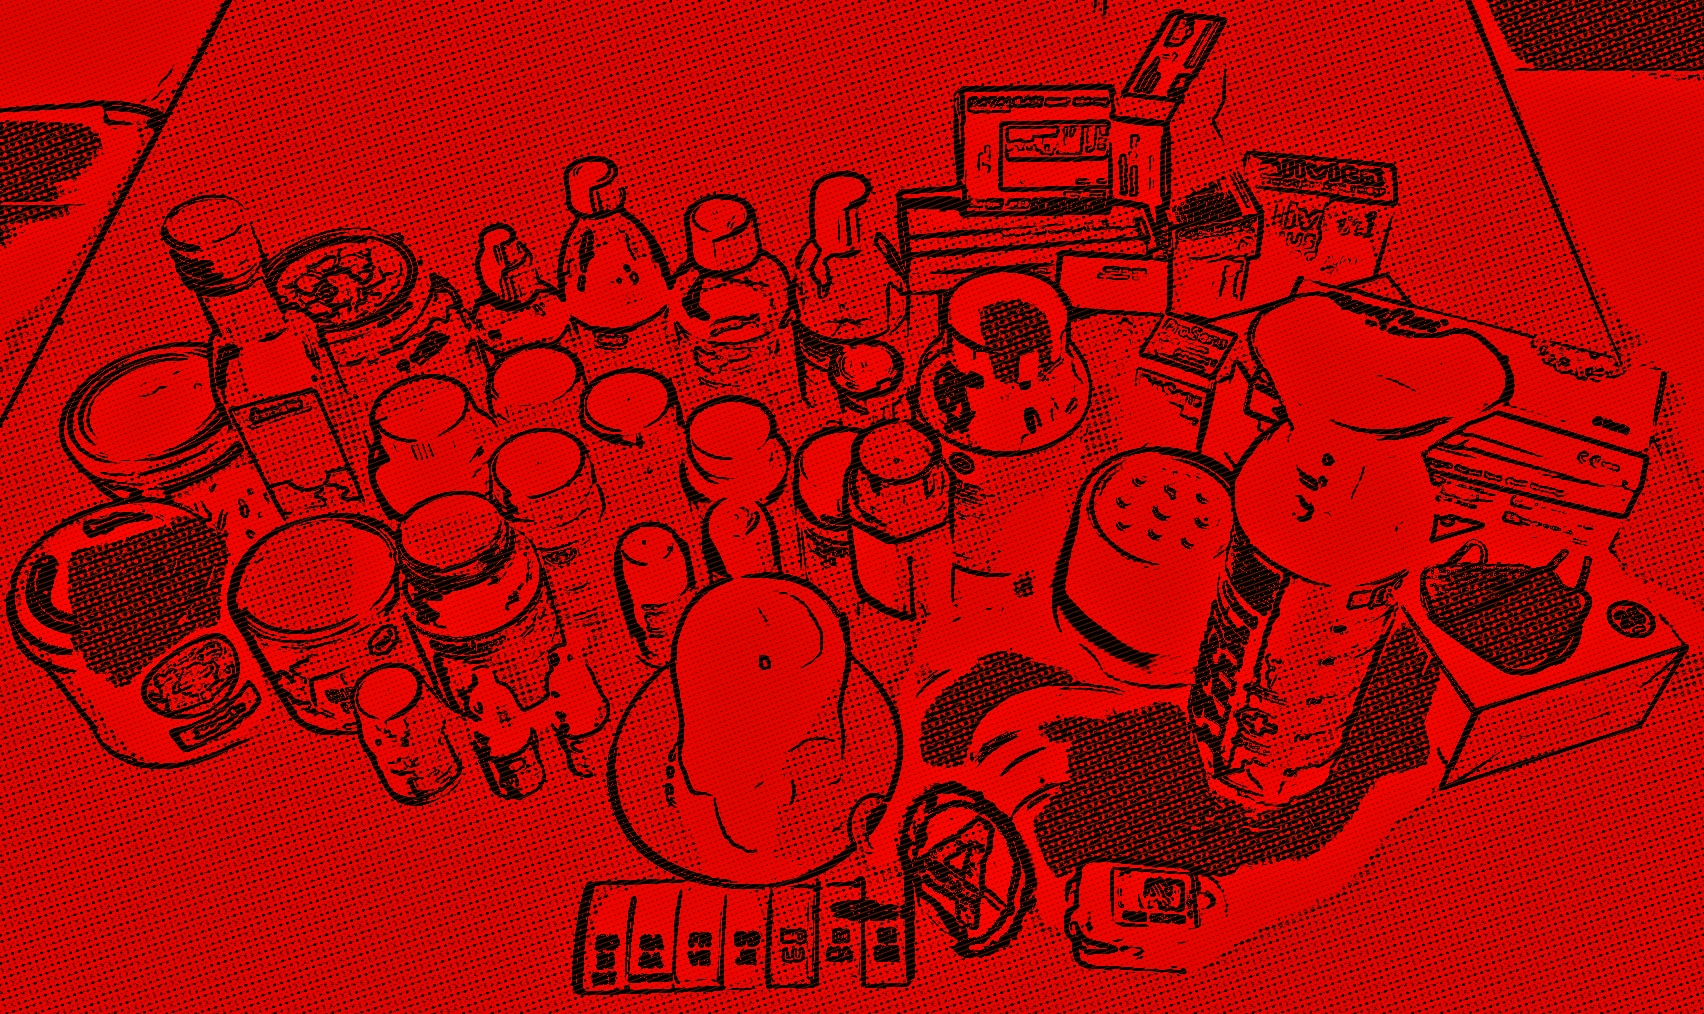 A big collection of medication, supplements and devices that need to be used daily or kept around for certain occasions by a person who has Long COVID, a red filter renders the image abstract